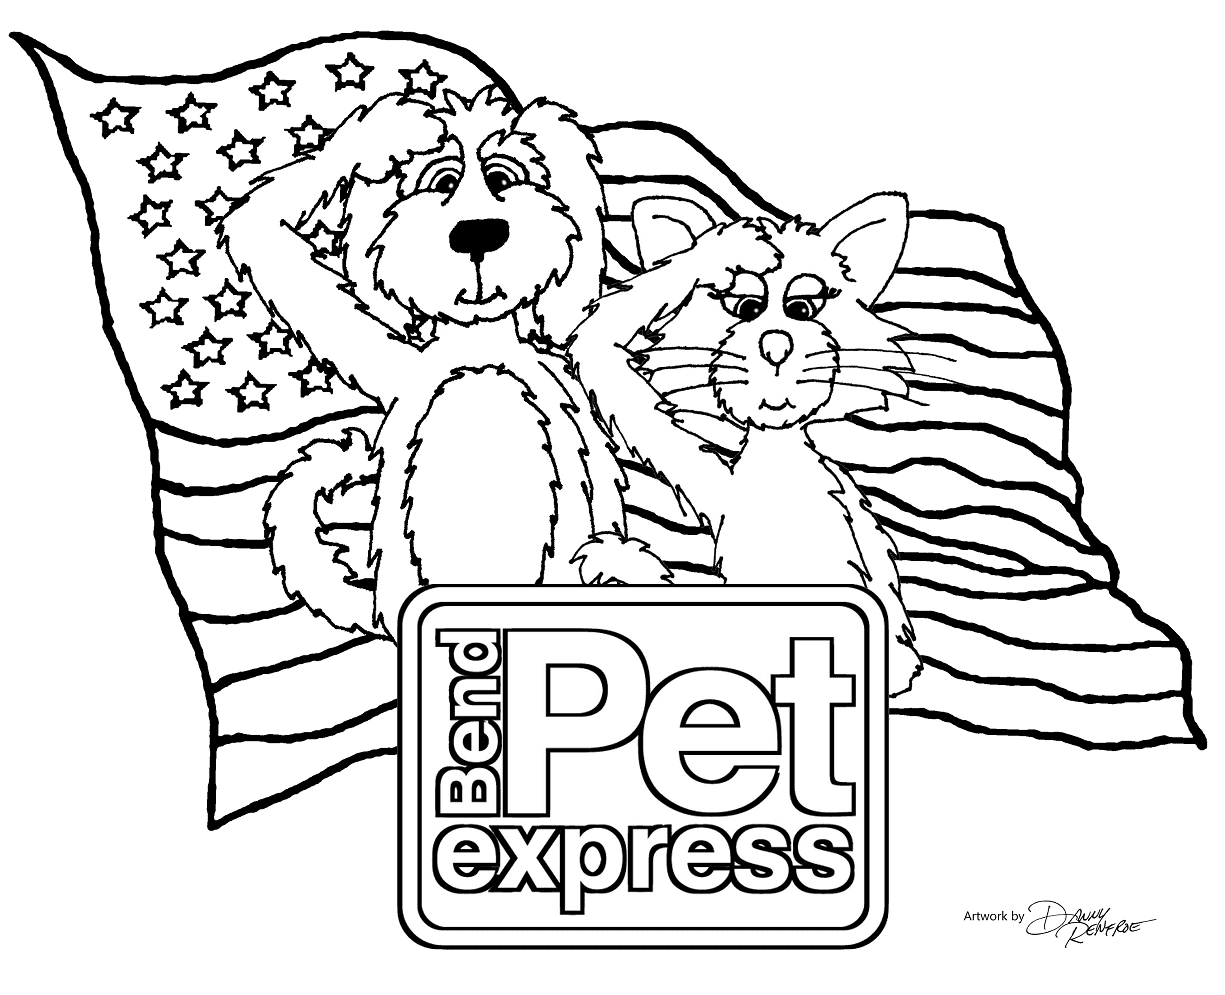 Bend Pet Express Coloring Page